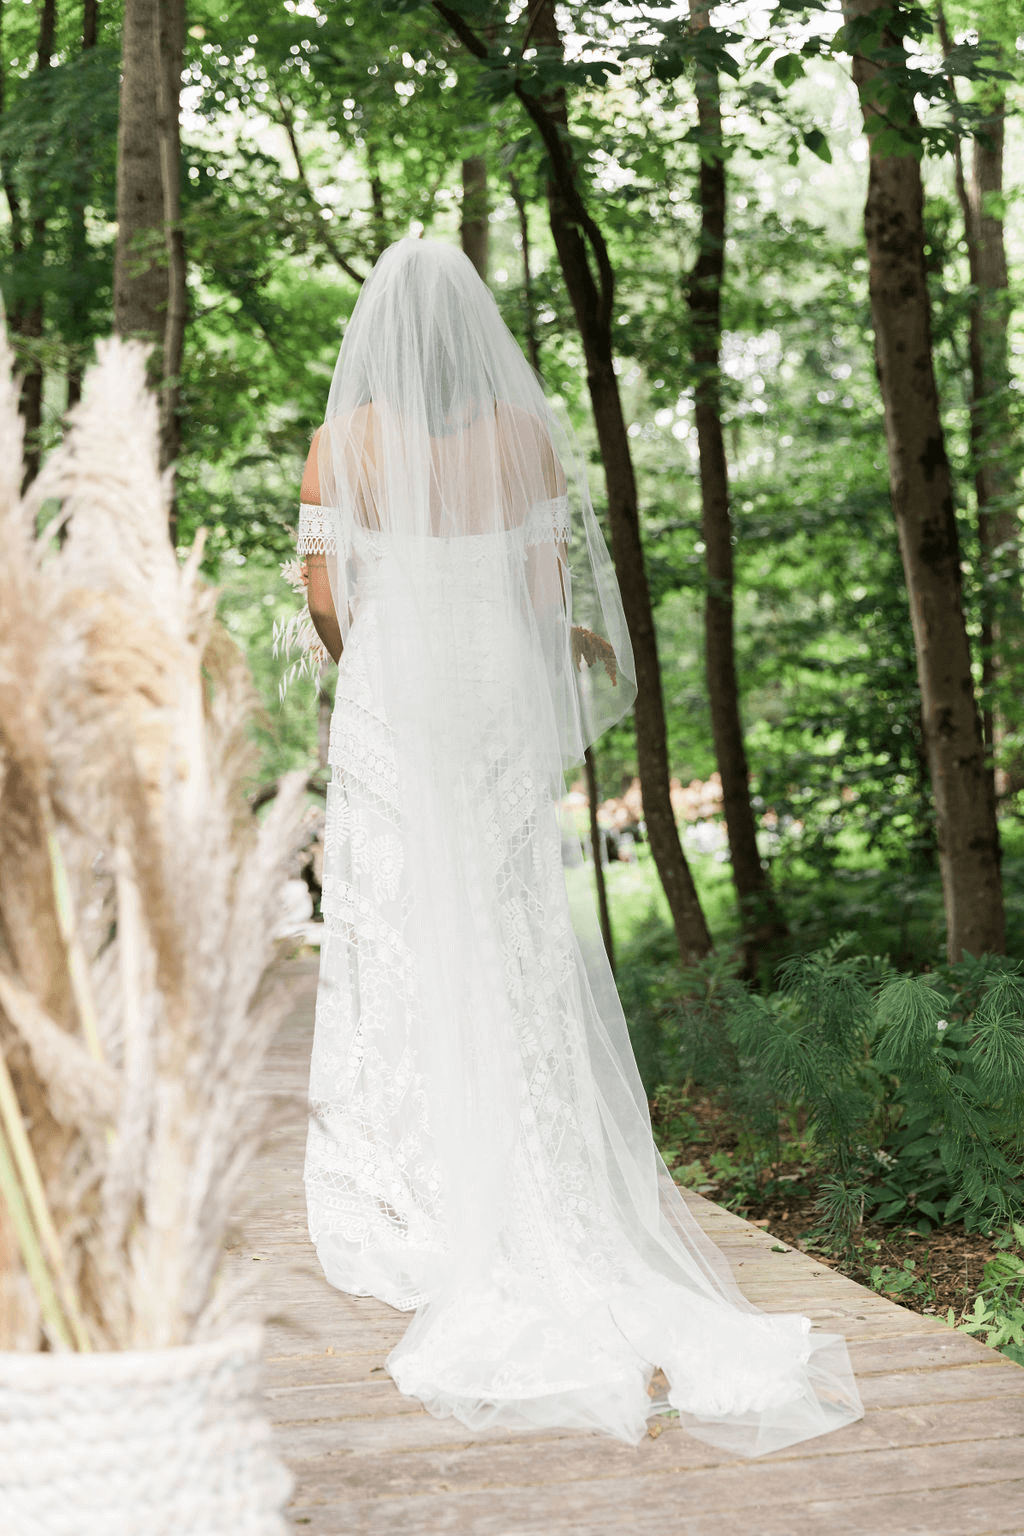 The bride, in her veil, walks back towards the camera